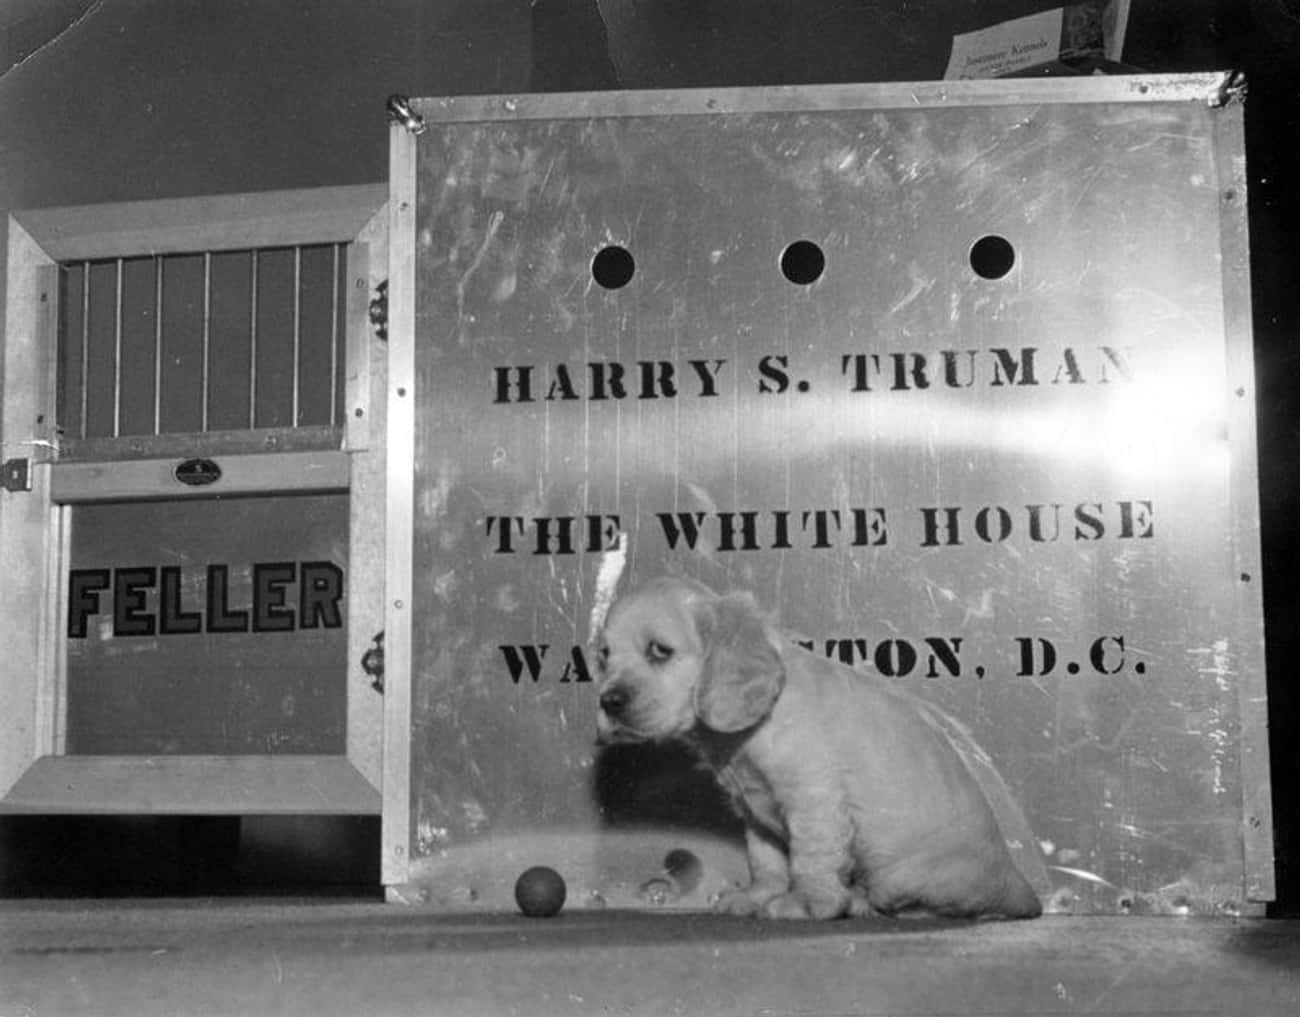 Feller, The Adorable Puppy Who Was Given To President Truman